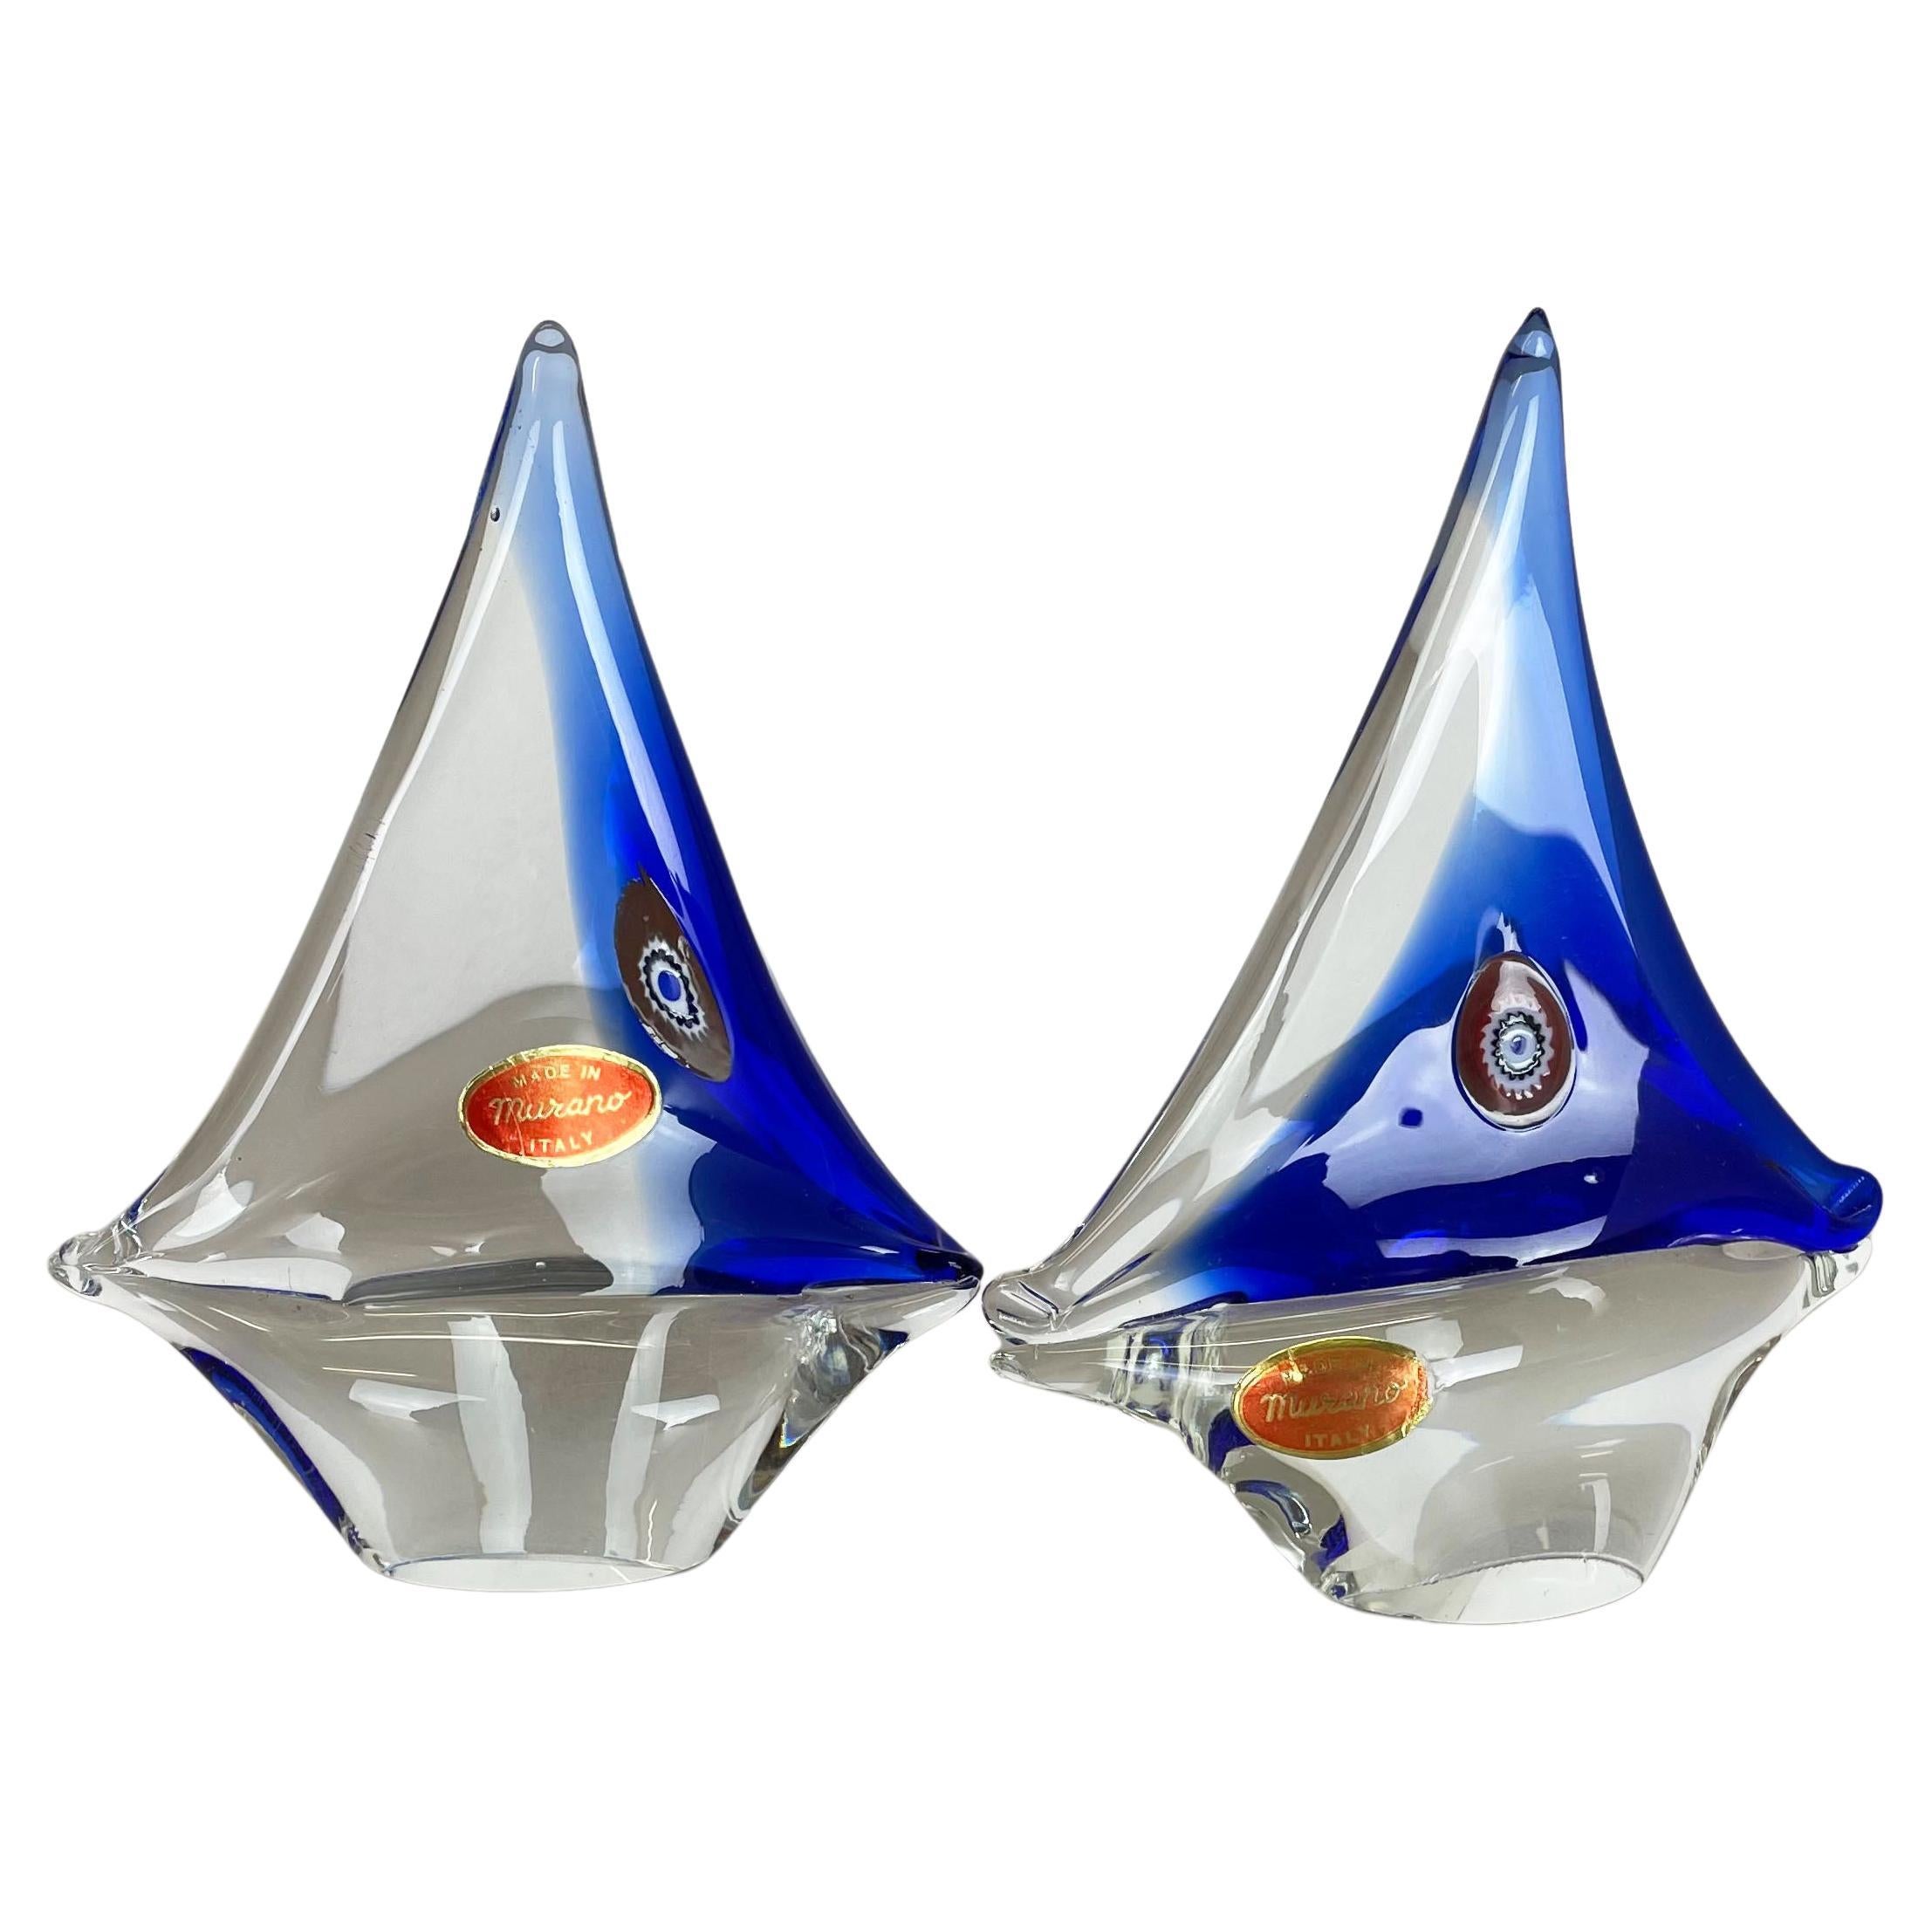 Set of 2 Murano Glass Sailing Boats Ship Elements, Murano, Italy 1970 For Sale